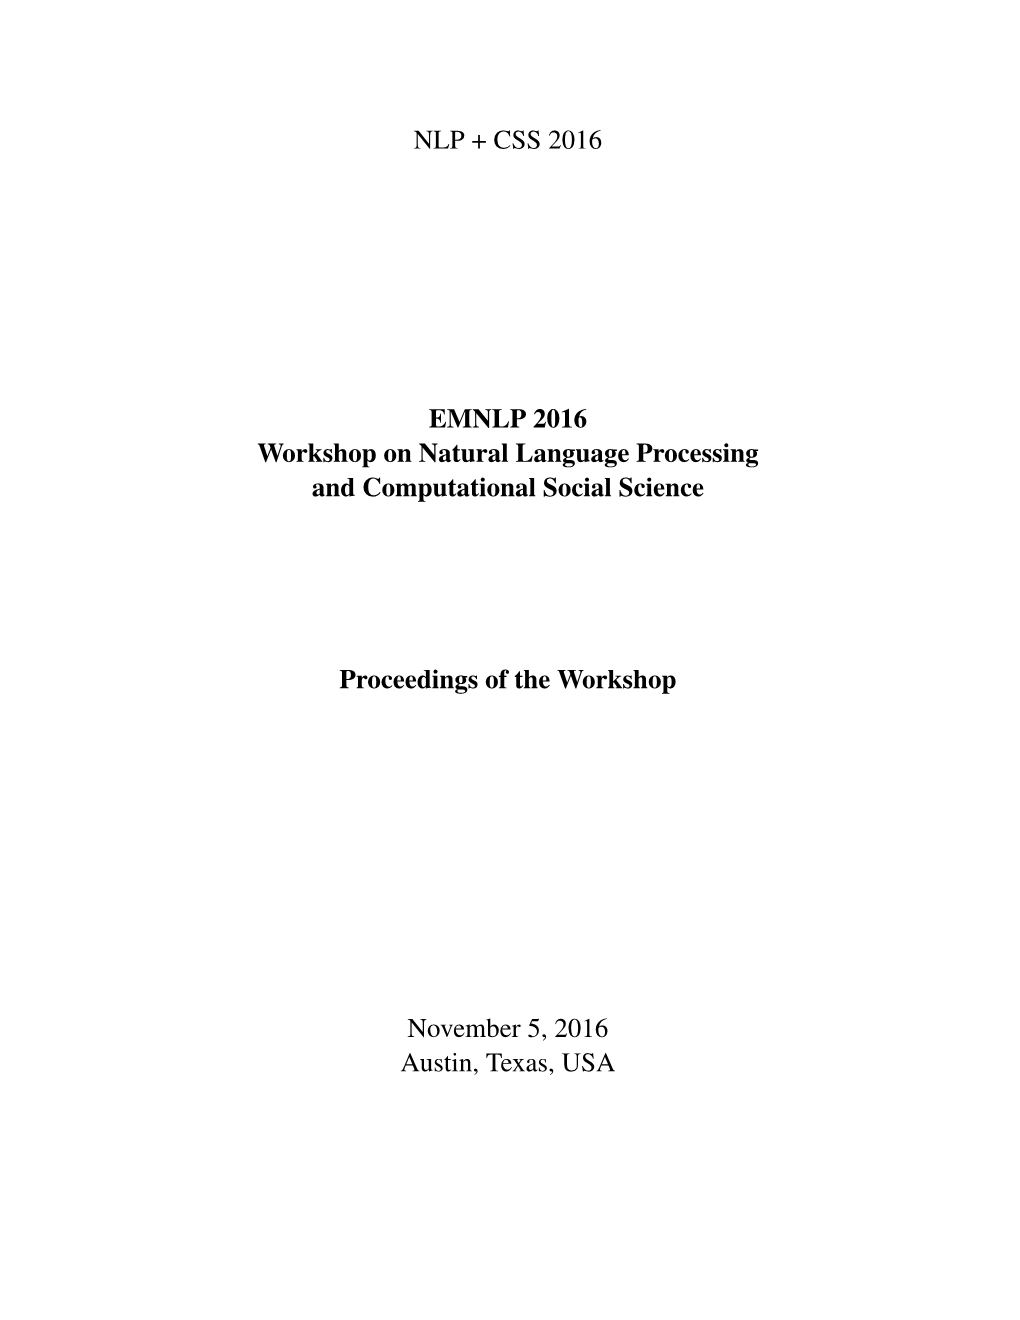 Proceedings of EMNLP Workshop on Natural Language Processing And